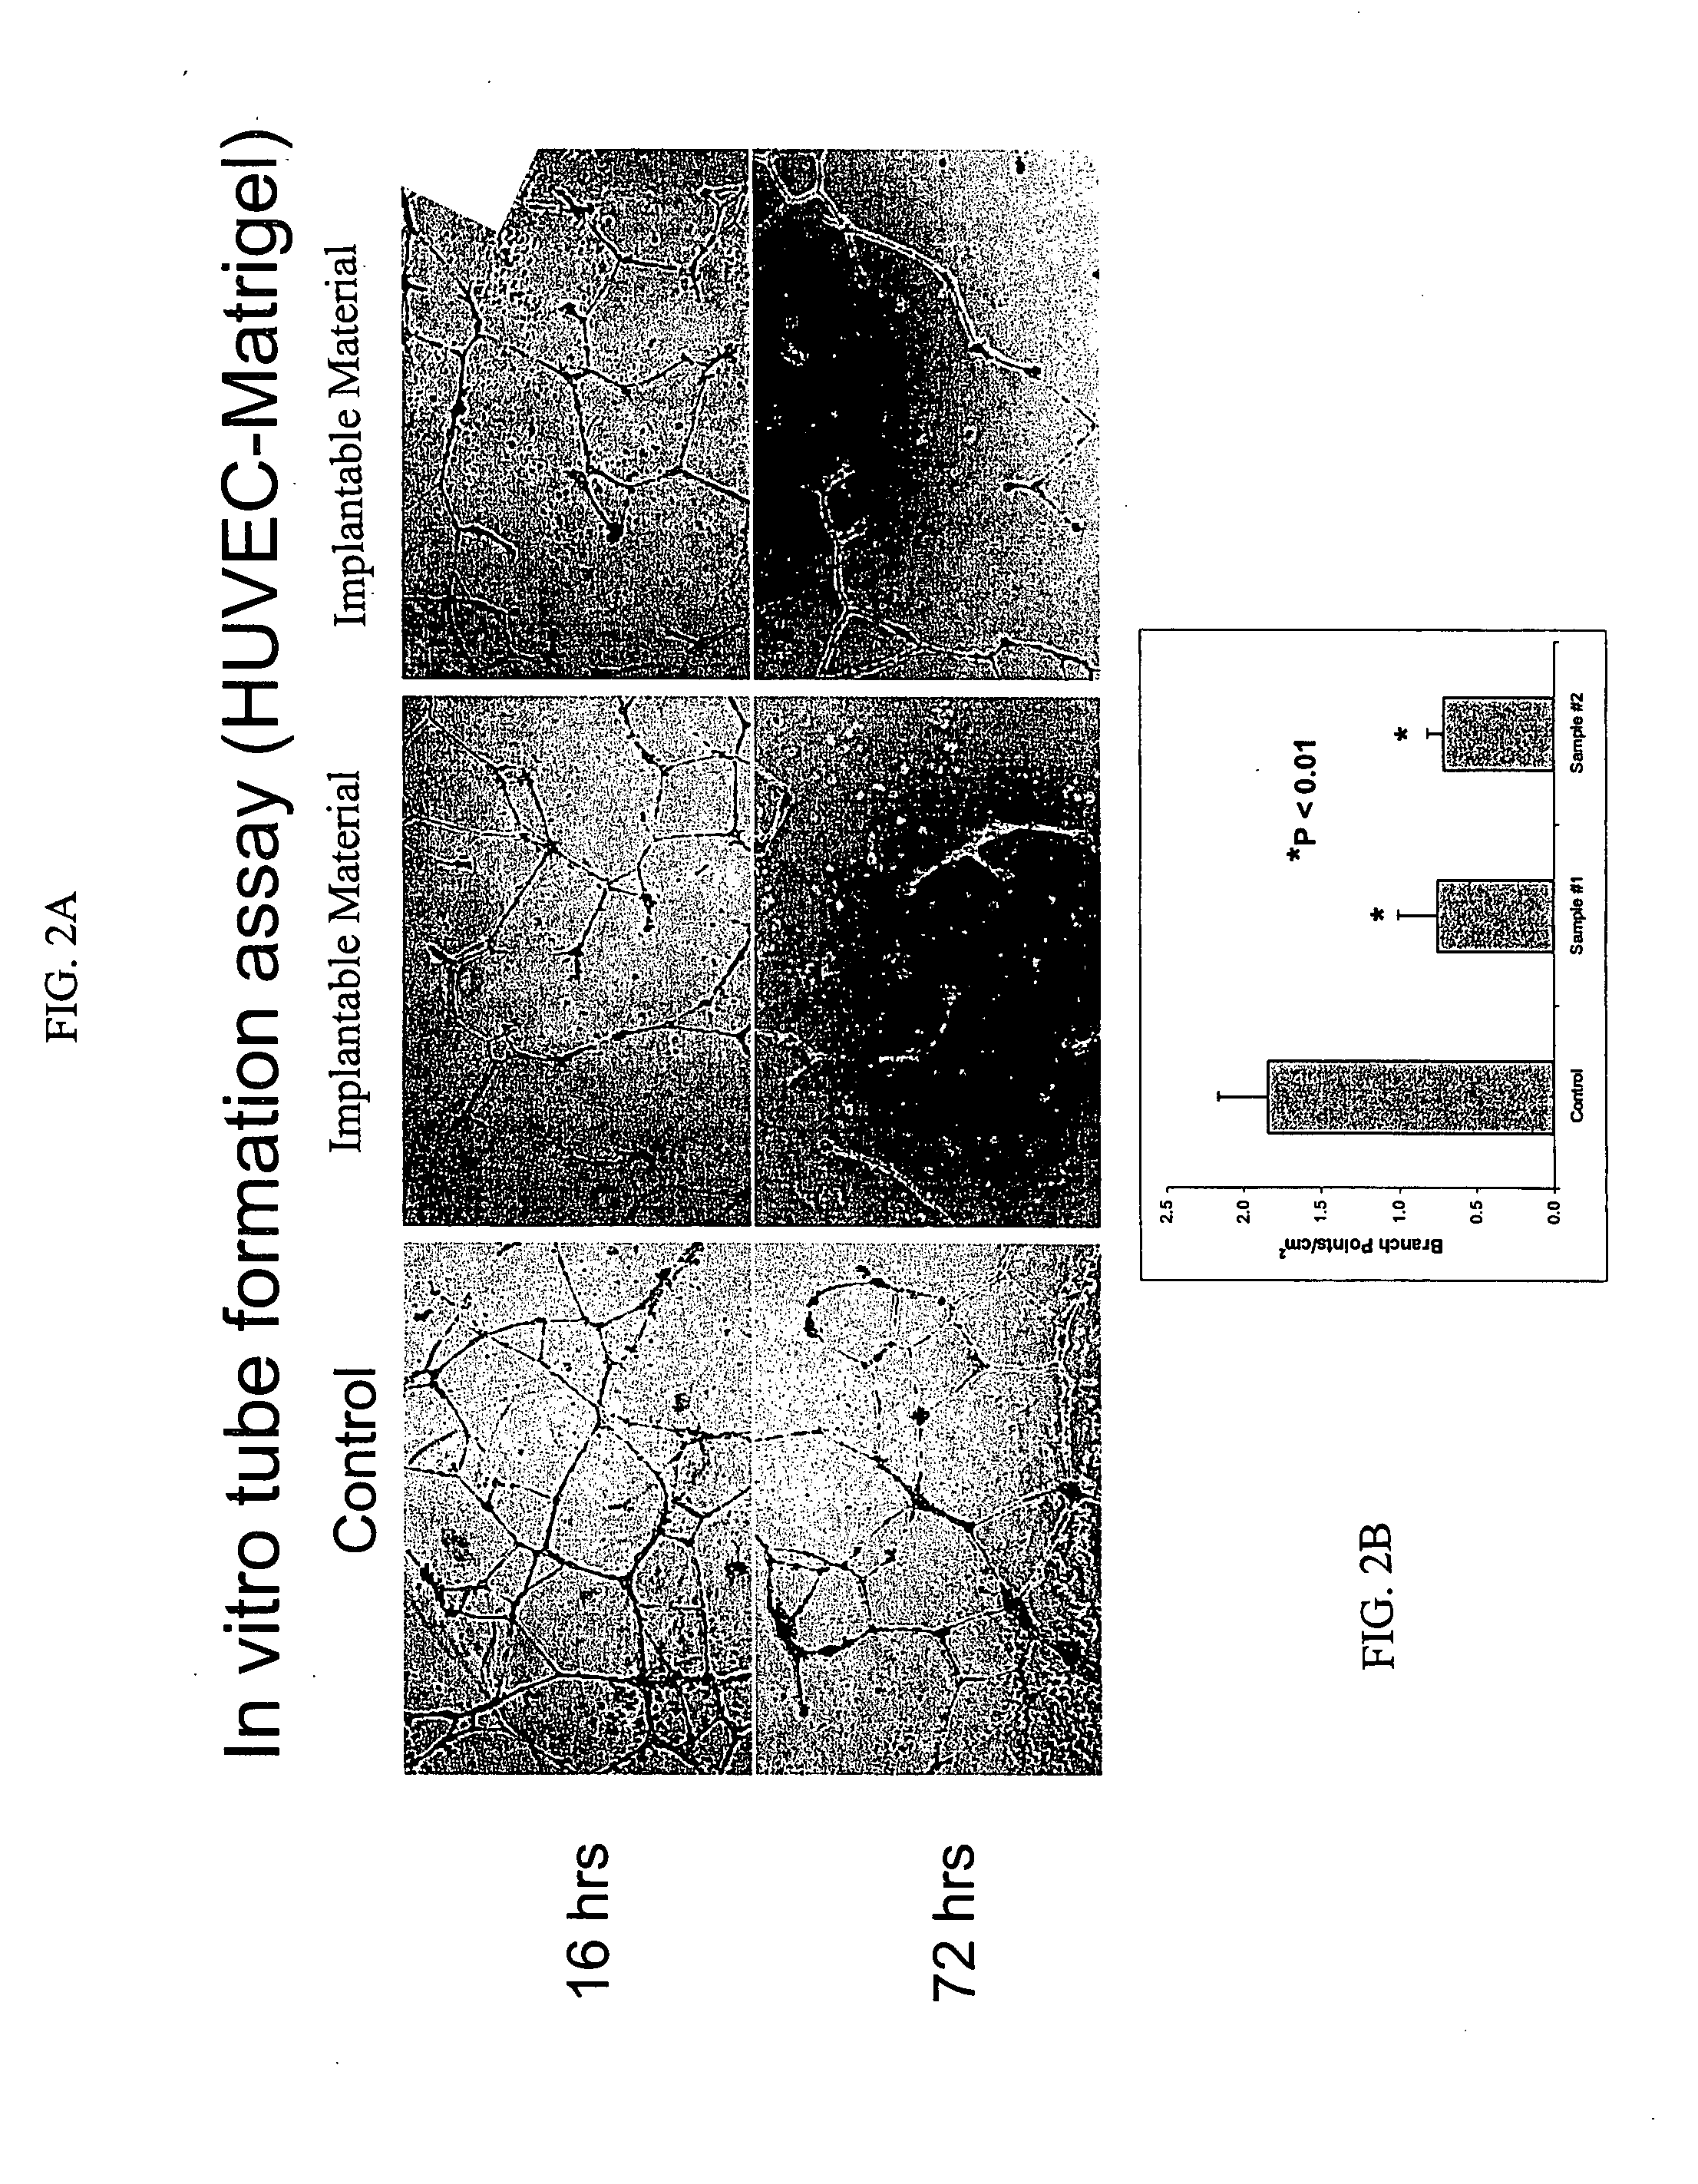 Materials and Methods for Treating and Managing Angiogenesis-Mediated Diseases